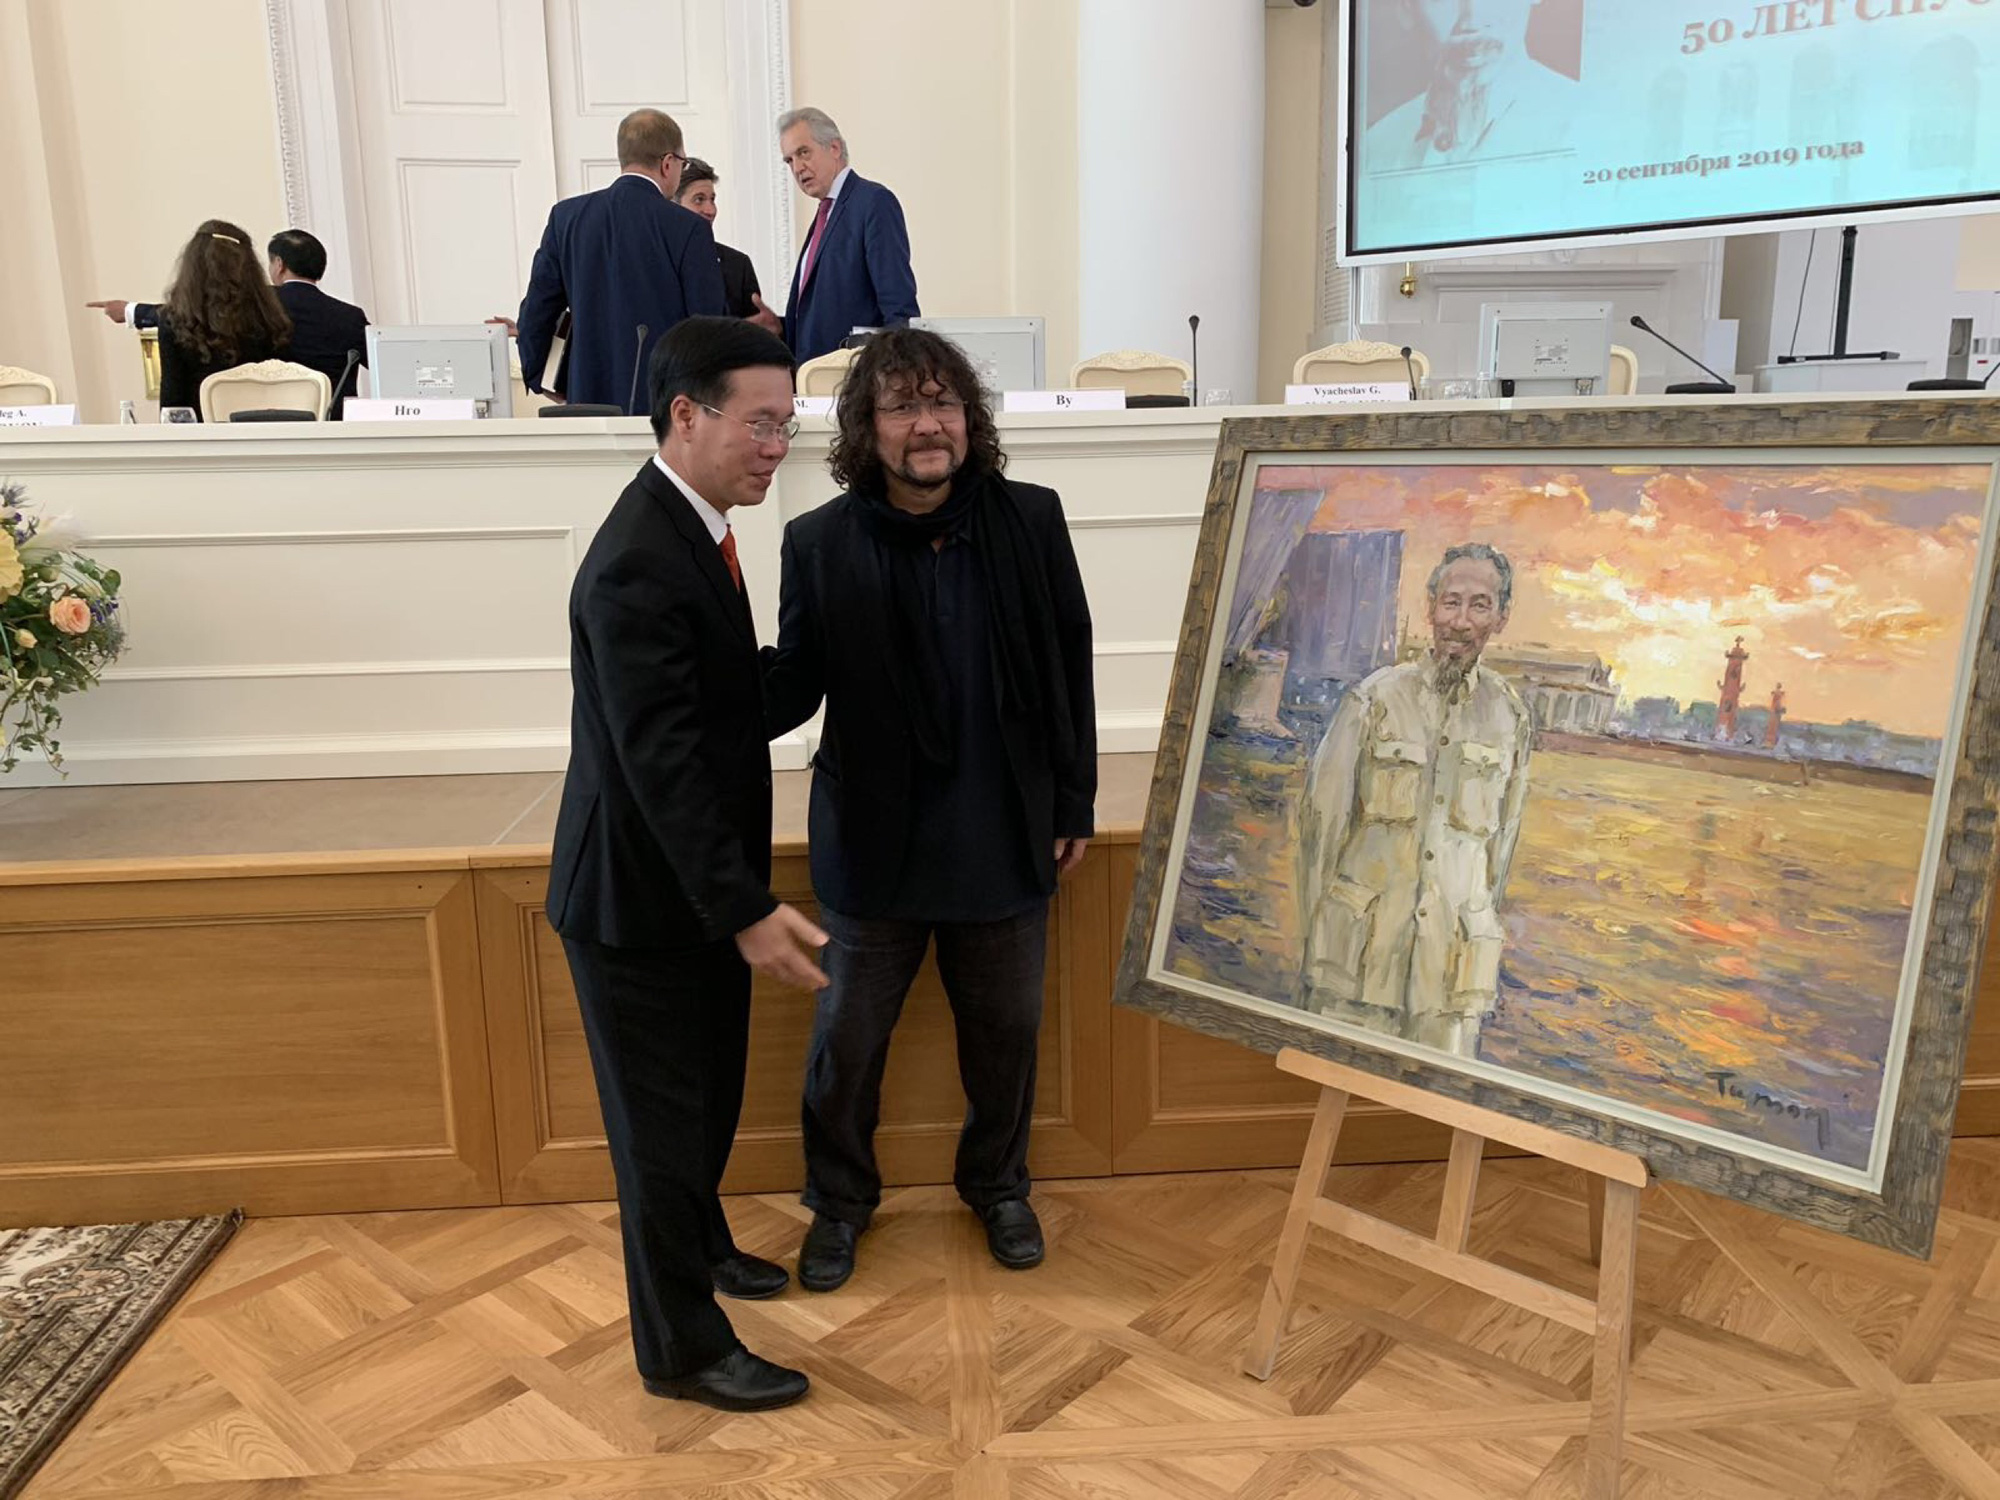 Russian artist Tuman Zhumabaev (right) and Vo Van Thuong, head of the Central Party Committee's Propaganda and Education, stand in front of one of Zhumabaev’s paintings depicting late Vietnamese President Ho Chi Minh, which was presented as a gift to the delegation of Vietnamese leaders during their visit to Russia in this photo captured on February 20, 2019 and provided by Lilac gallery.